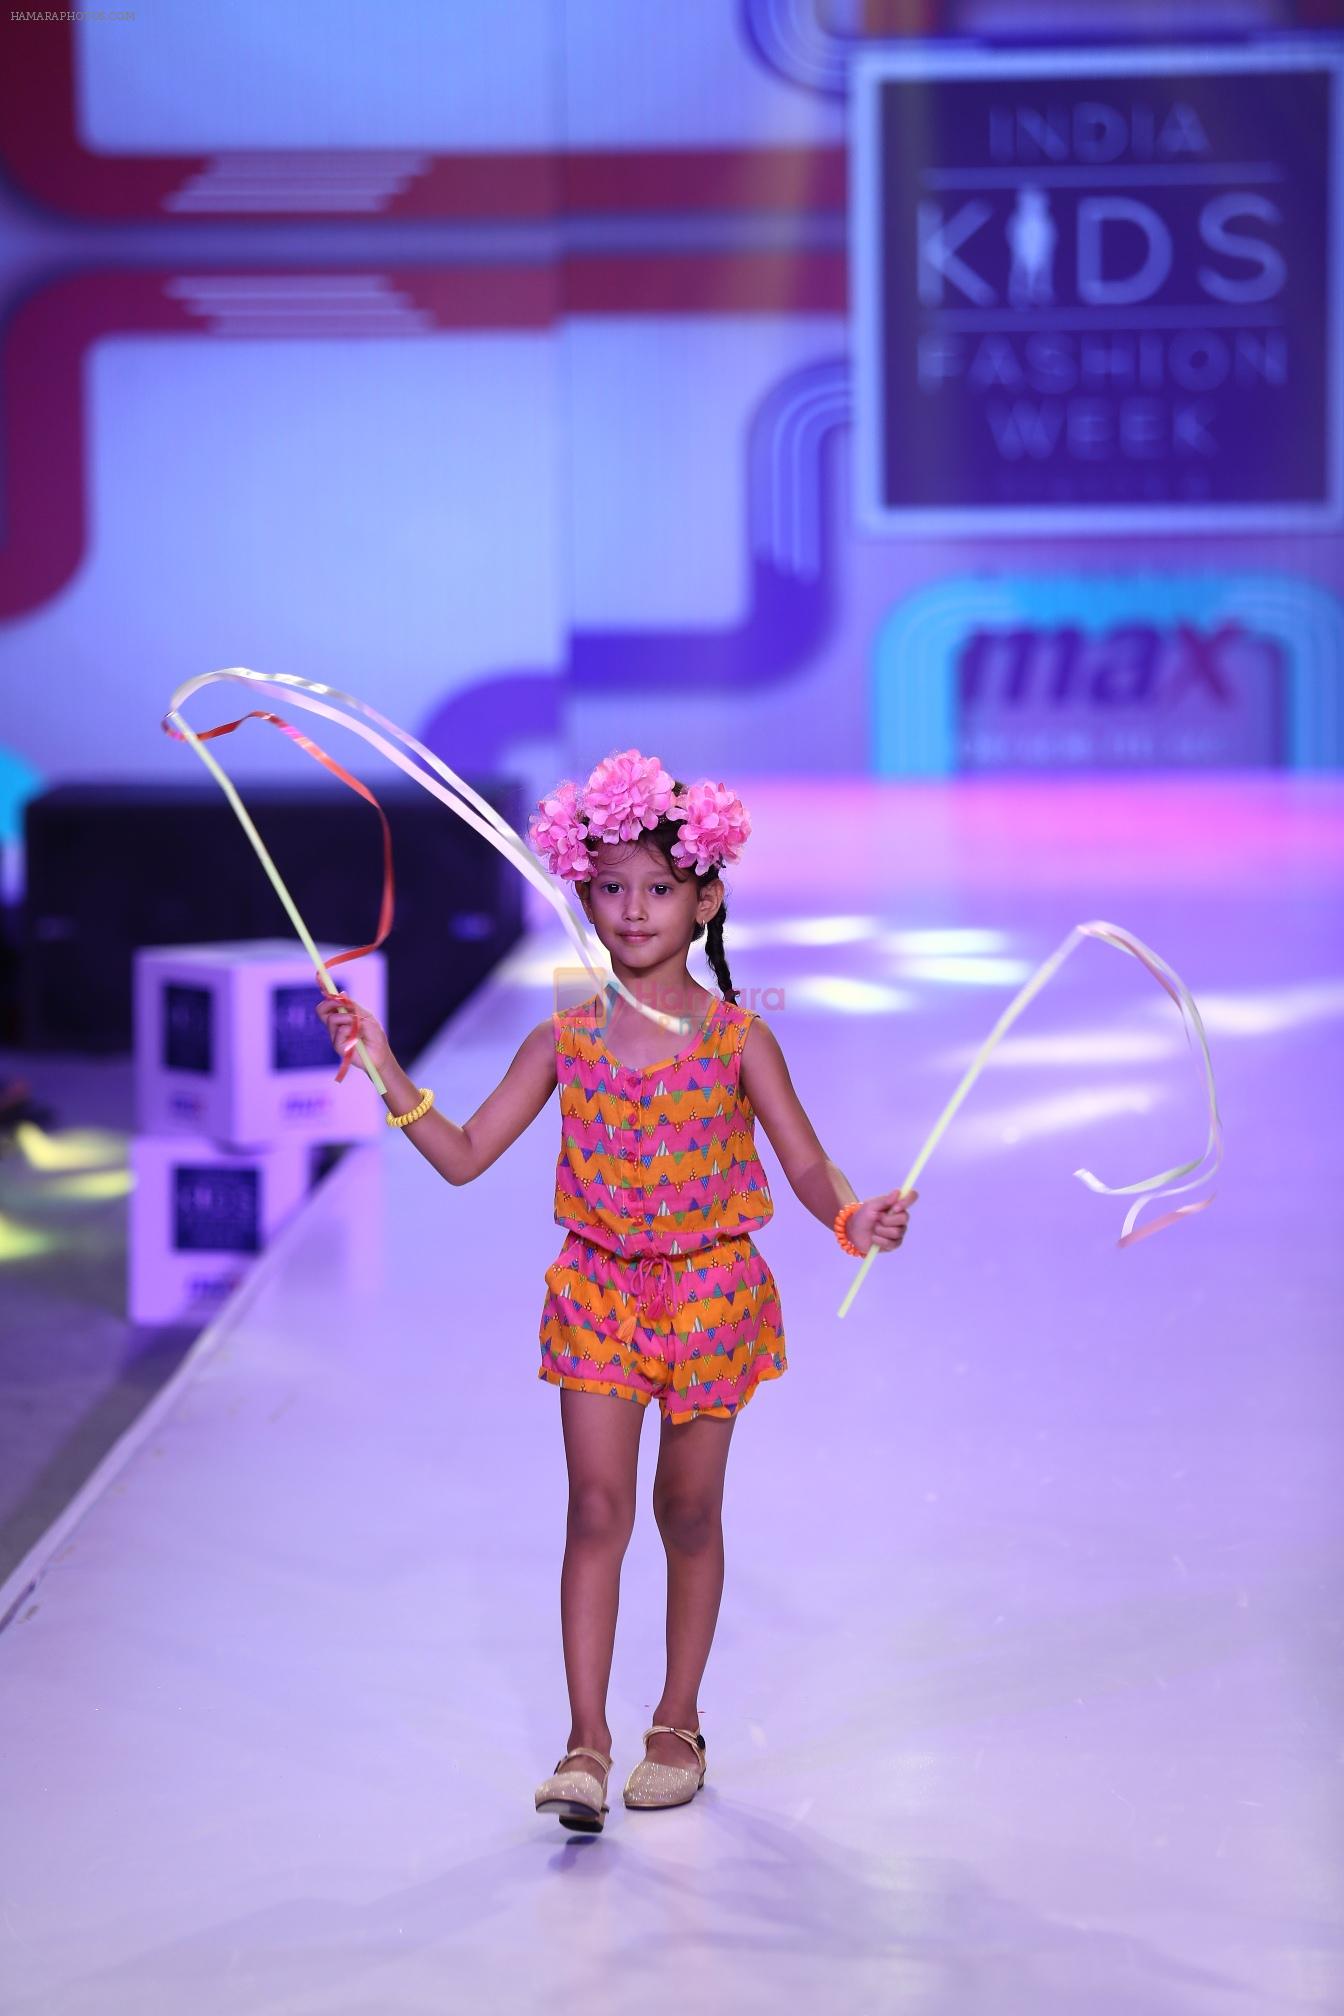 at INDIA KIDS FASHION WEEK on 5th June 2016